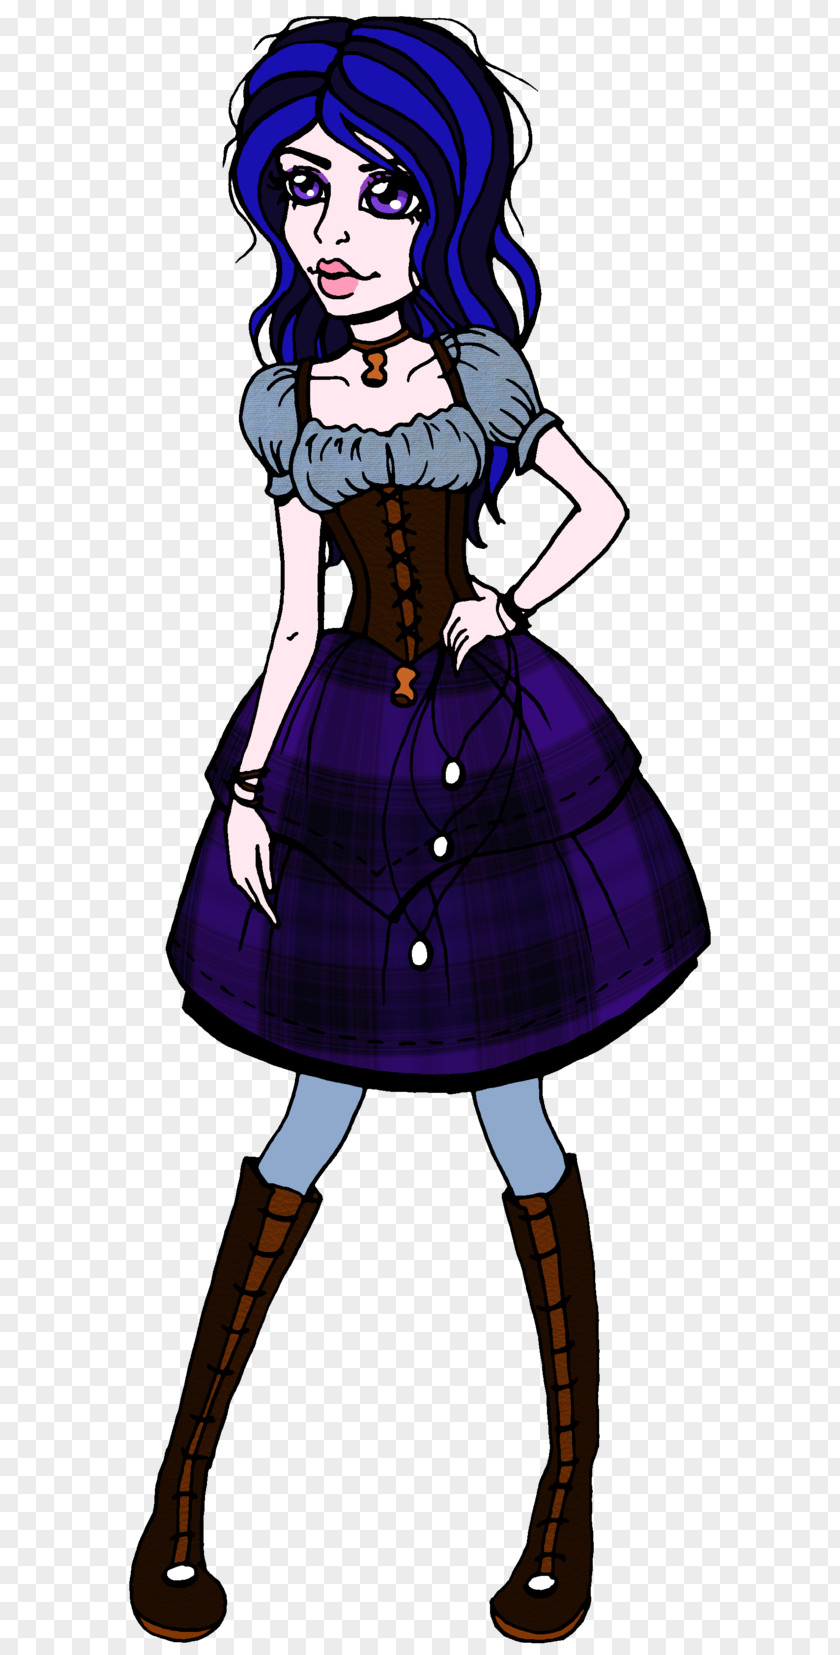 Don't Dress Revealing Manners Costume Design Clip Art PNG